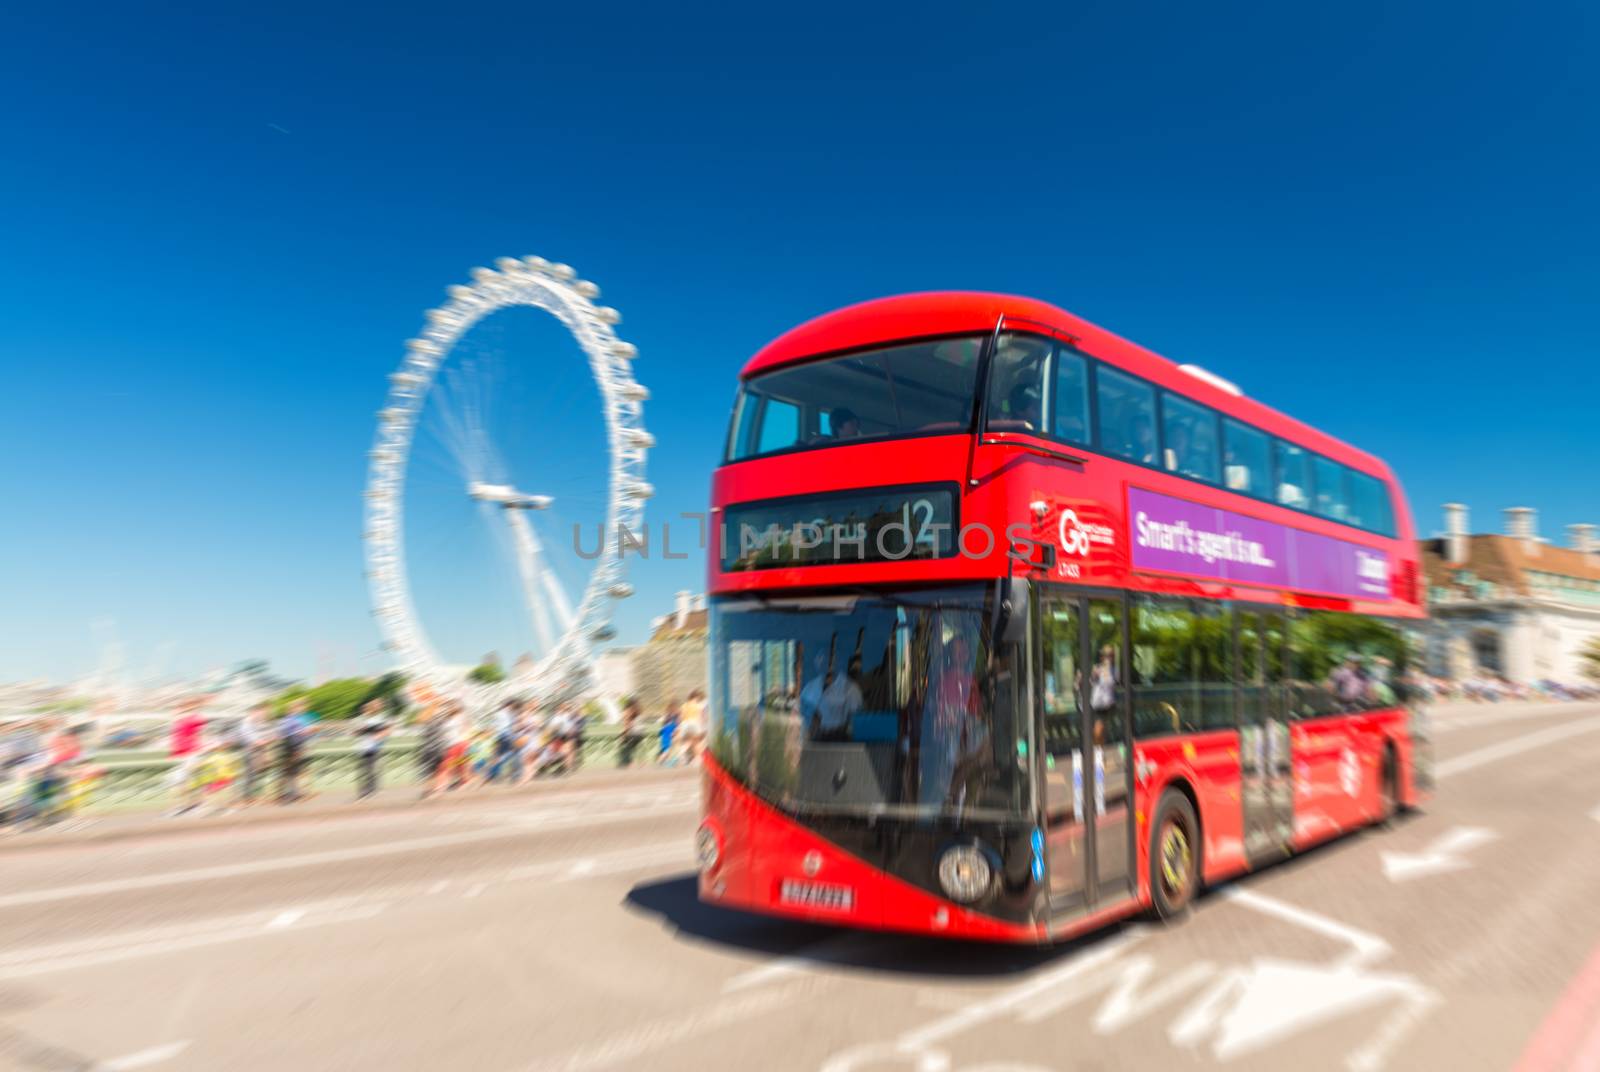 LONDON - JUNE 12, 2015: Fast moving red bus on Westminster Bridge. The London Bus service is one of the largest urban bus networks in the world with 8,000 buses covering 700 routes.